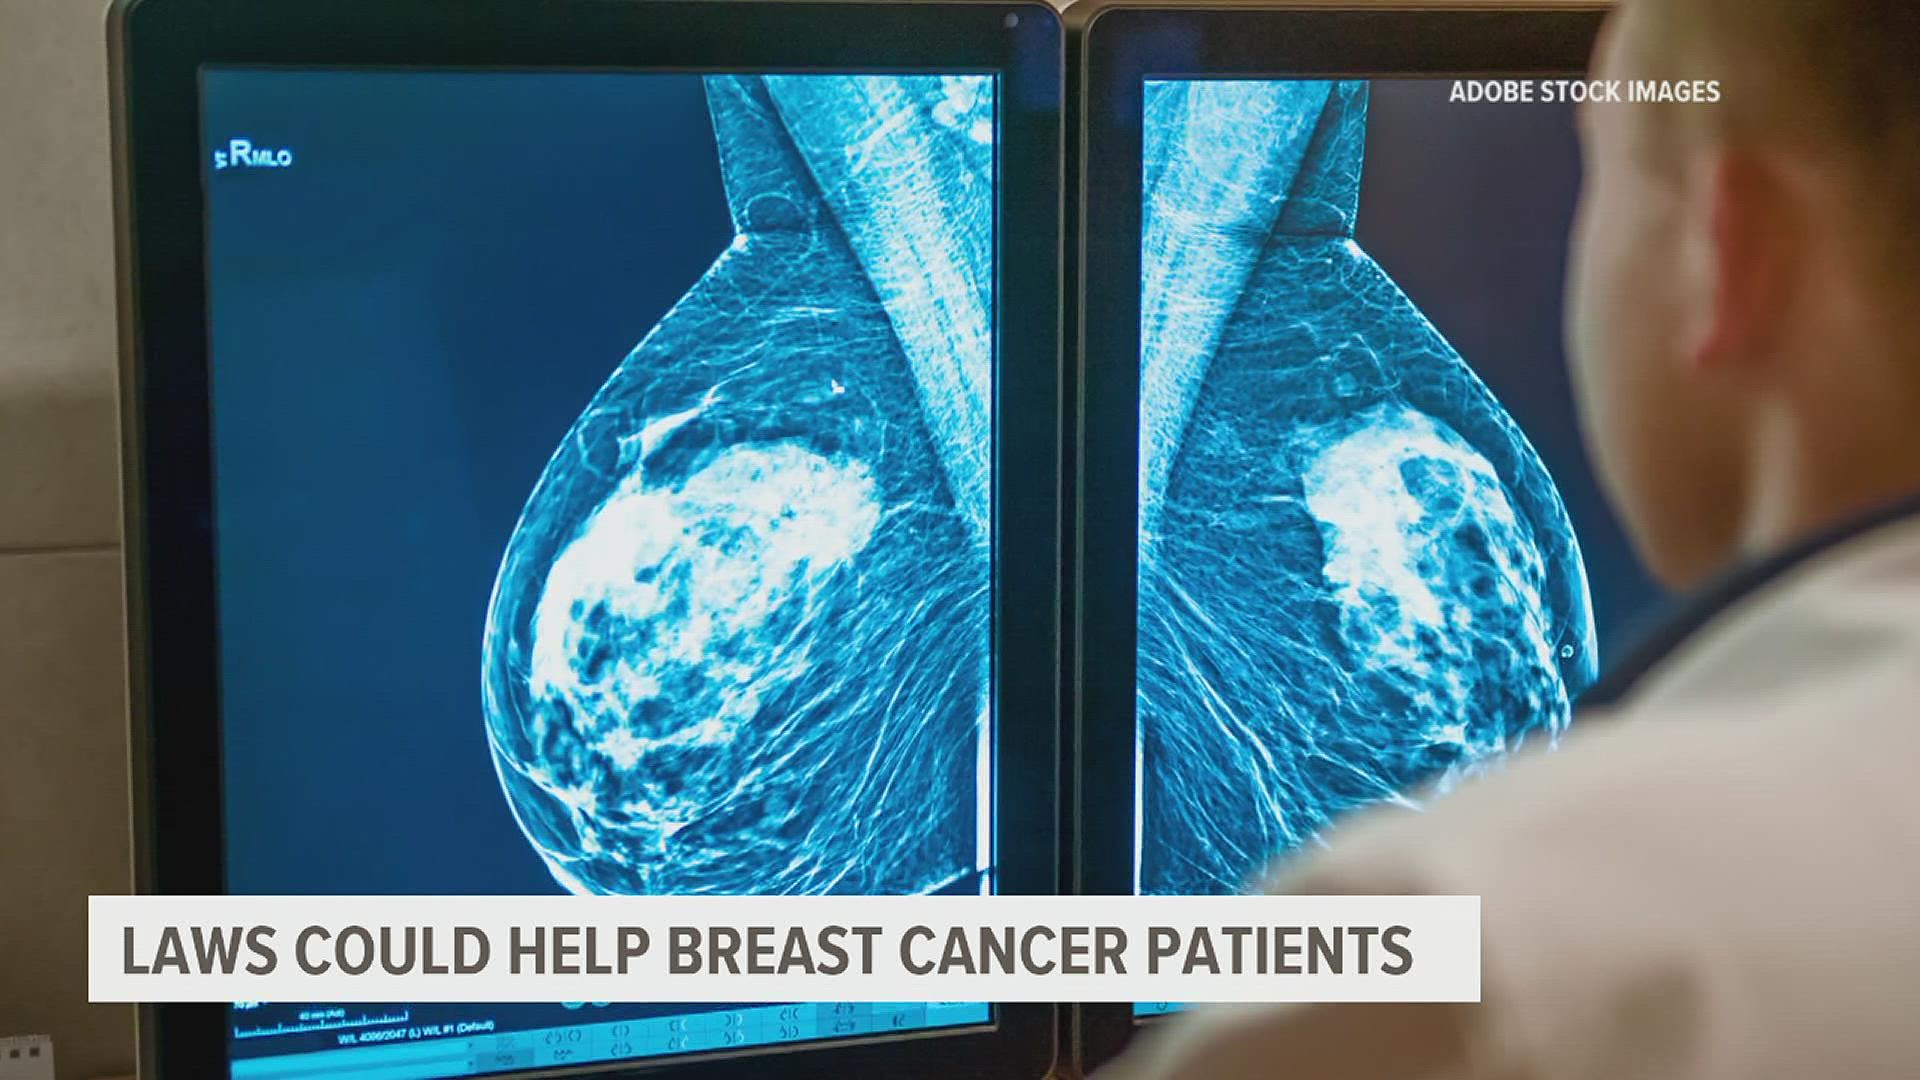 Researchers at Penn State College of Medicine say many states already have laws that are designed to help women who have an increased risk of getting breast cancer.